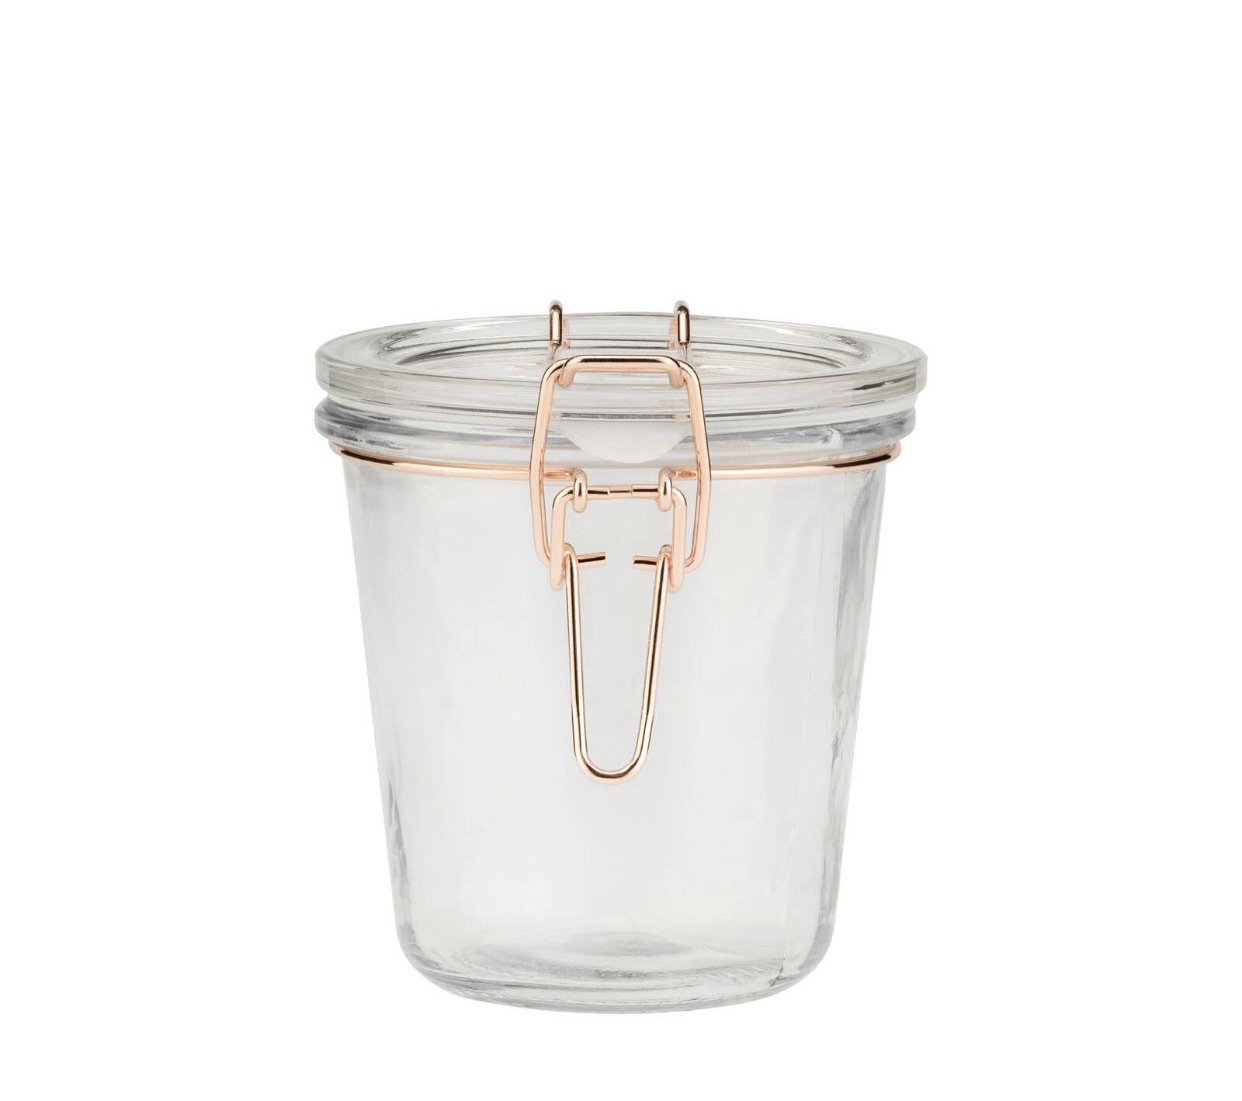 Hermetic Clamp Jar with rose gold clasp